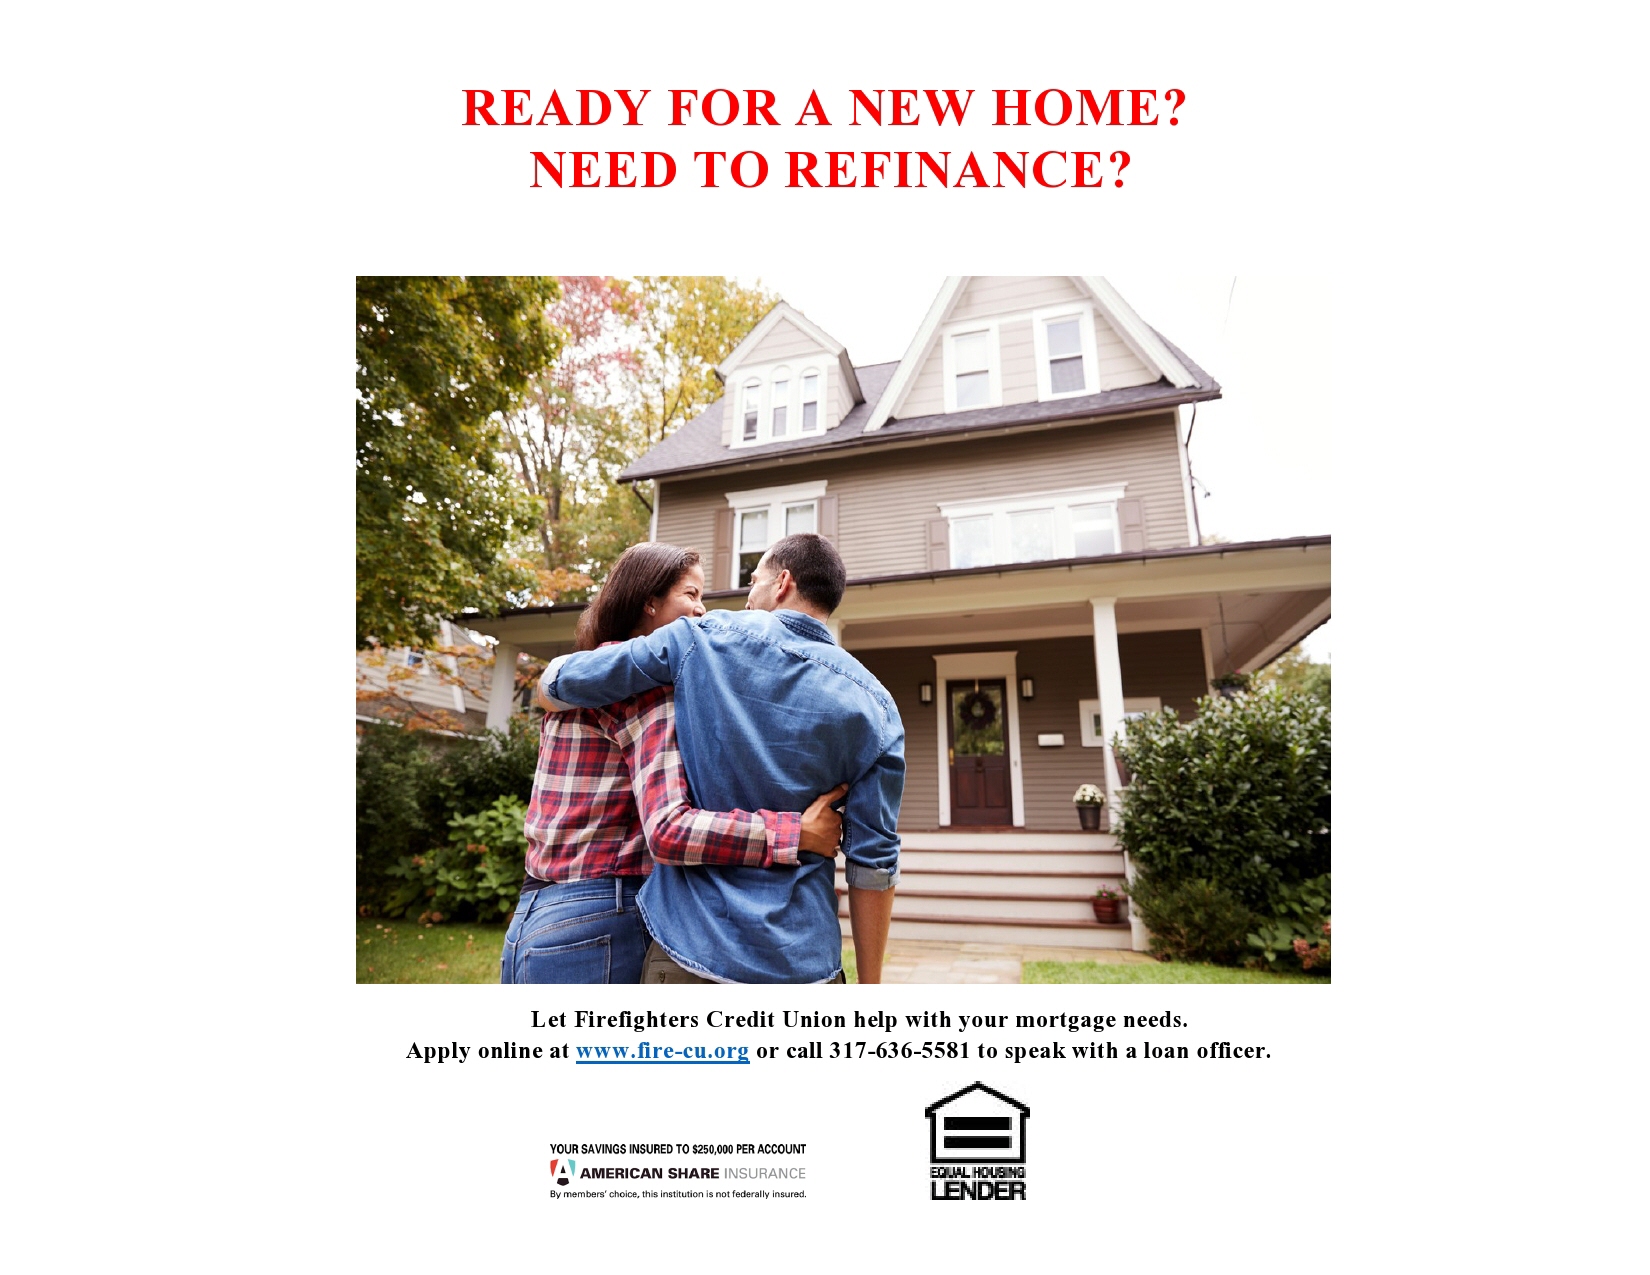 Let Firefighters Credit Union help with your mortgage needs-page0001 (2)